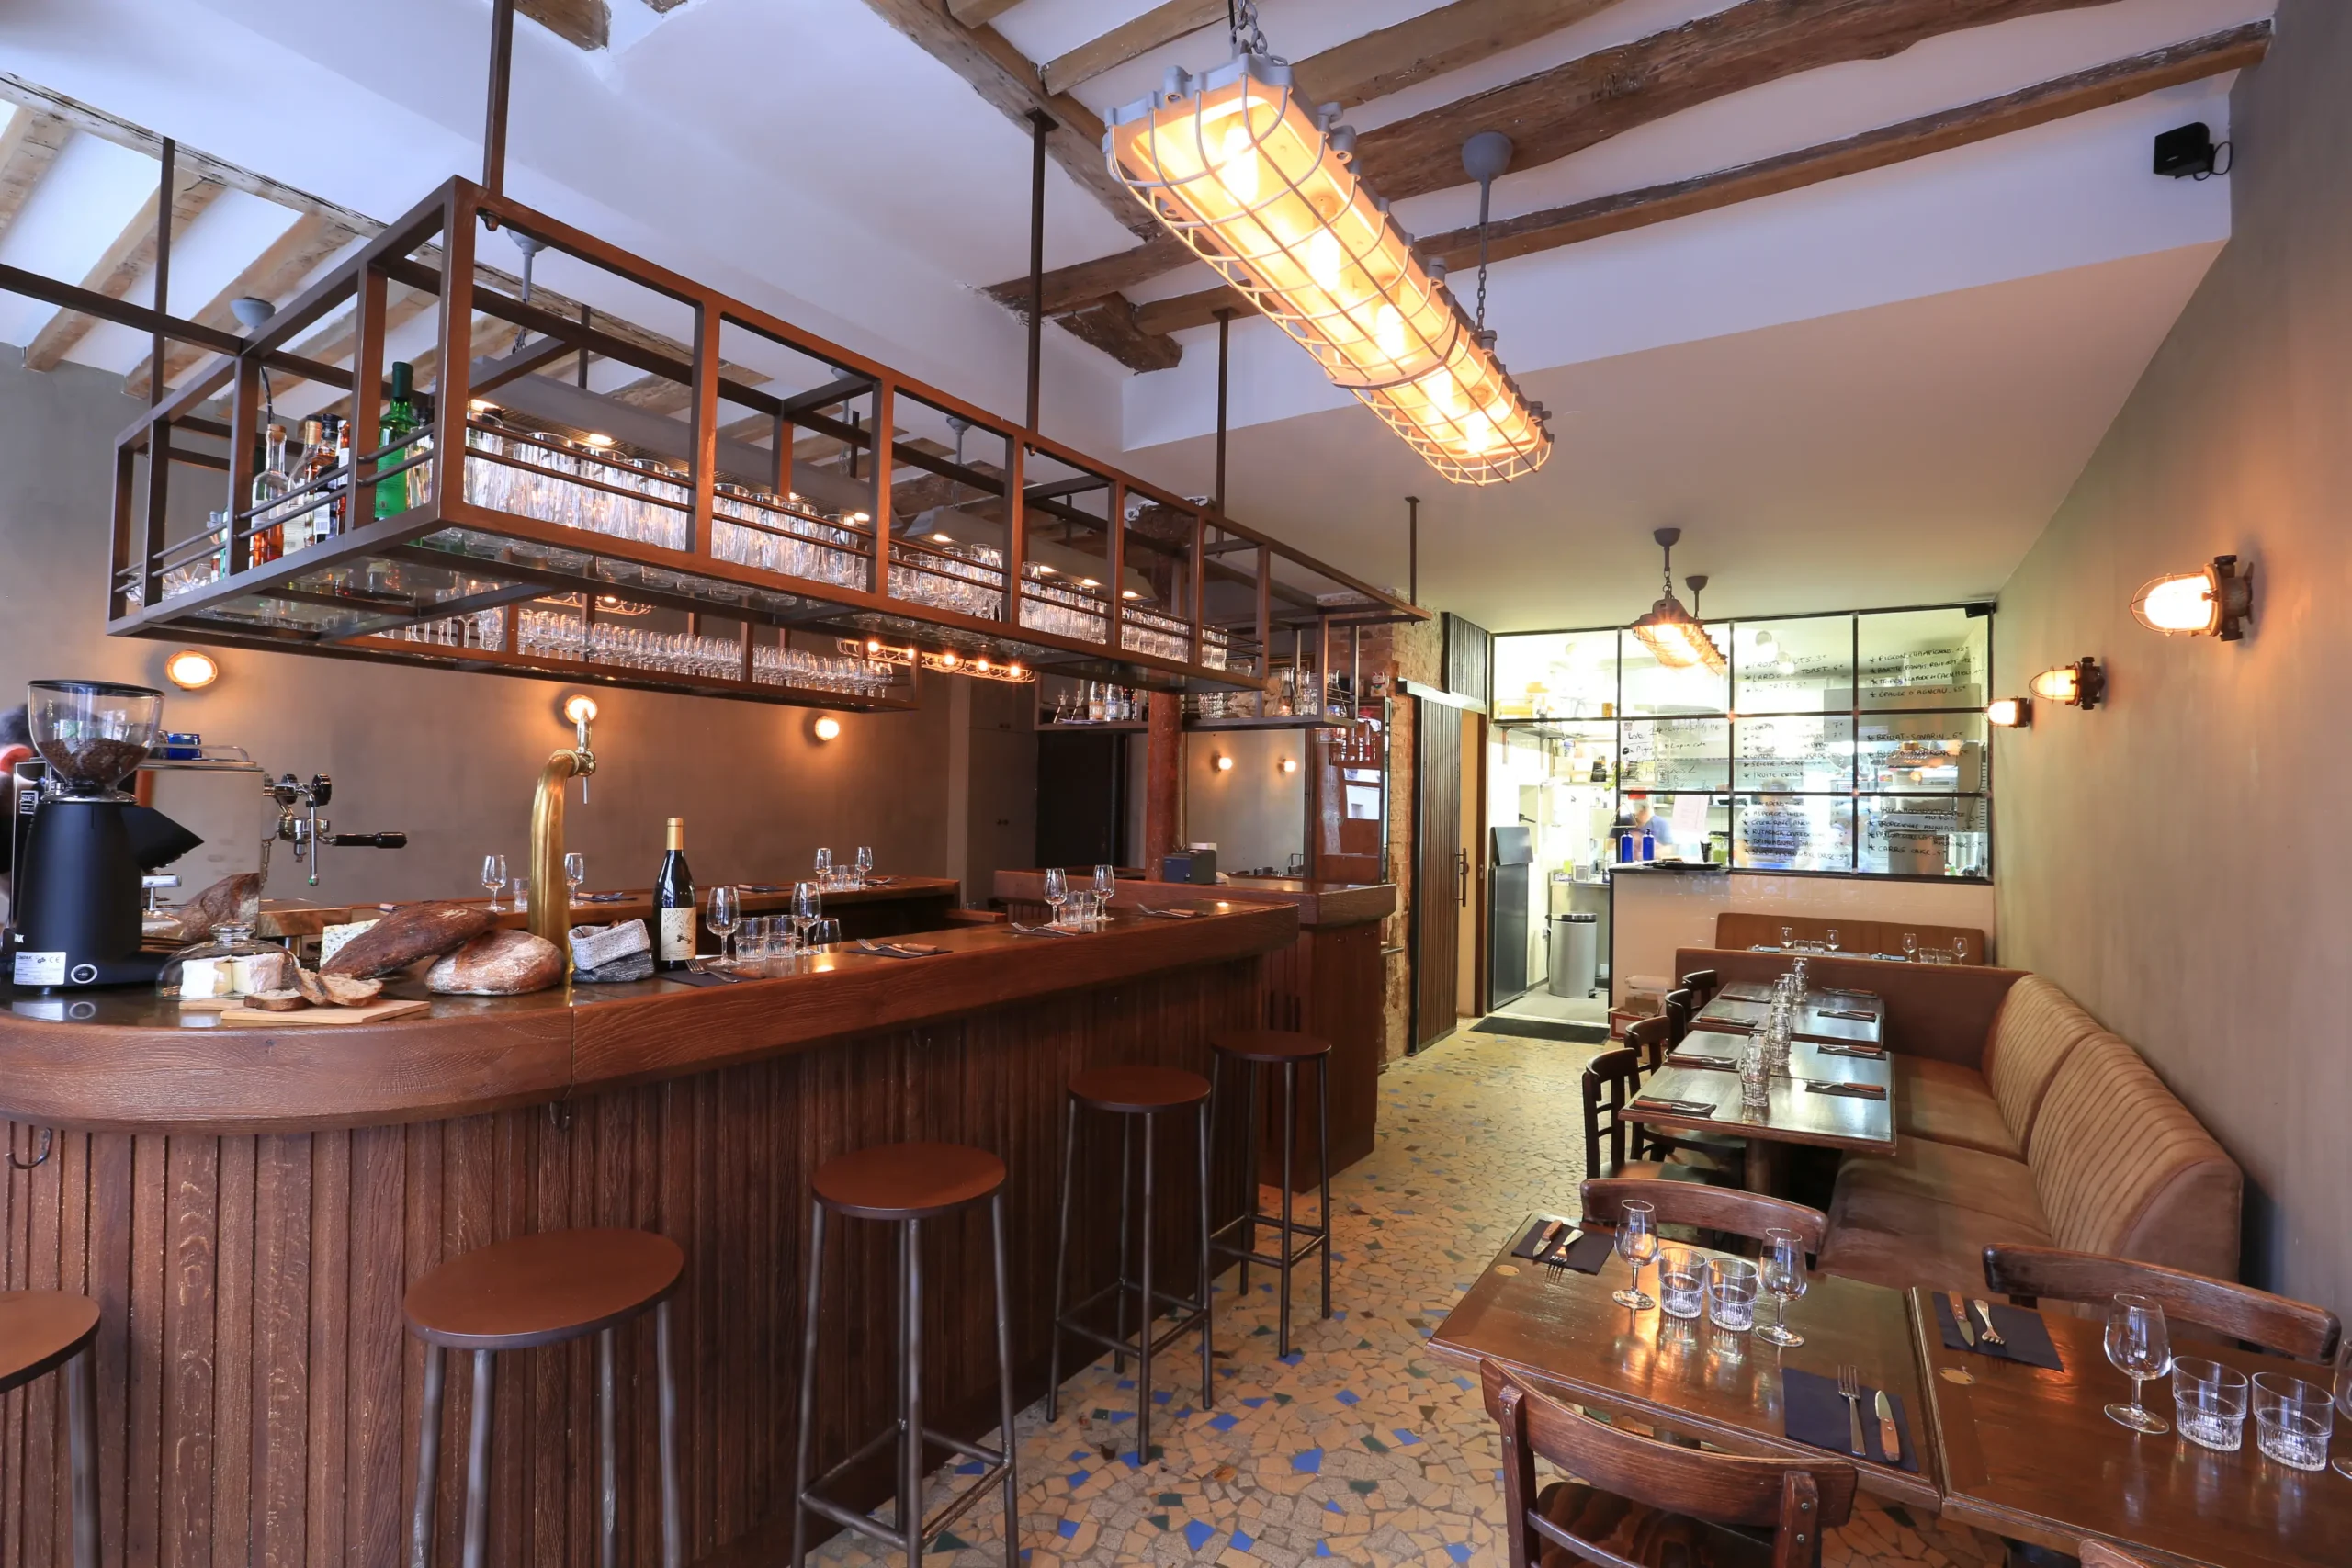 The rustic and inviting interior of Le Grand Bain Bistro in Paris, with an exposed beam ceiling, tiled flooring, a cozy bar area with hanging glasses, and wooden tables ready for guests.